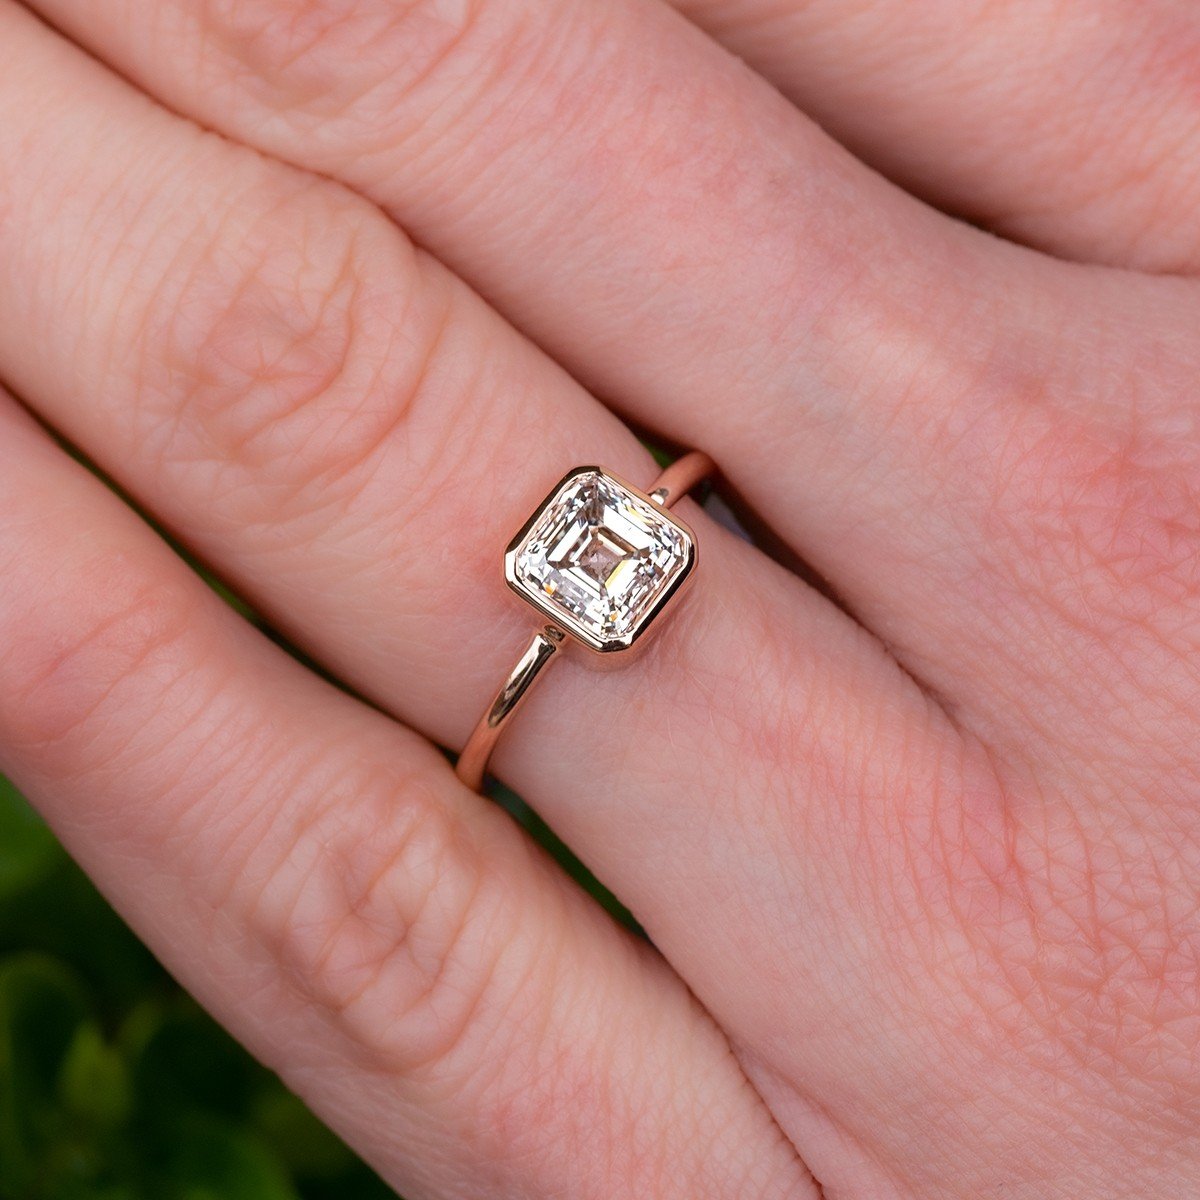 Square Diamond Ring With Halo-White Gold Engagement Ring